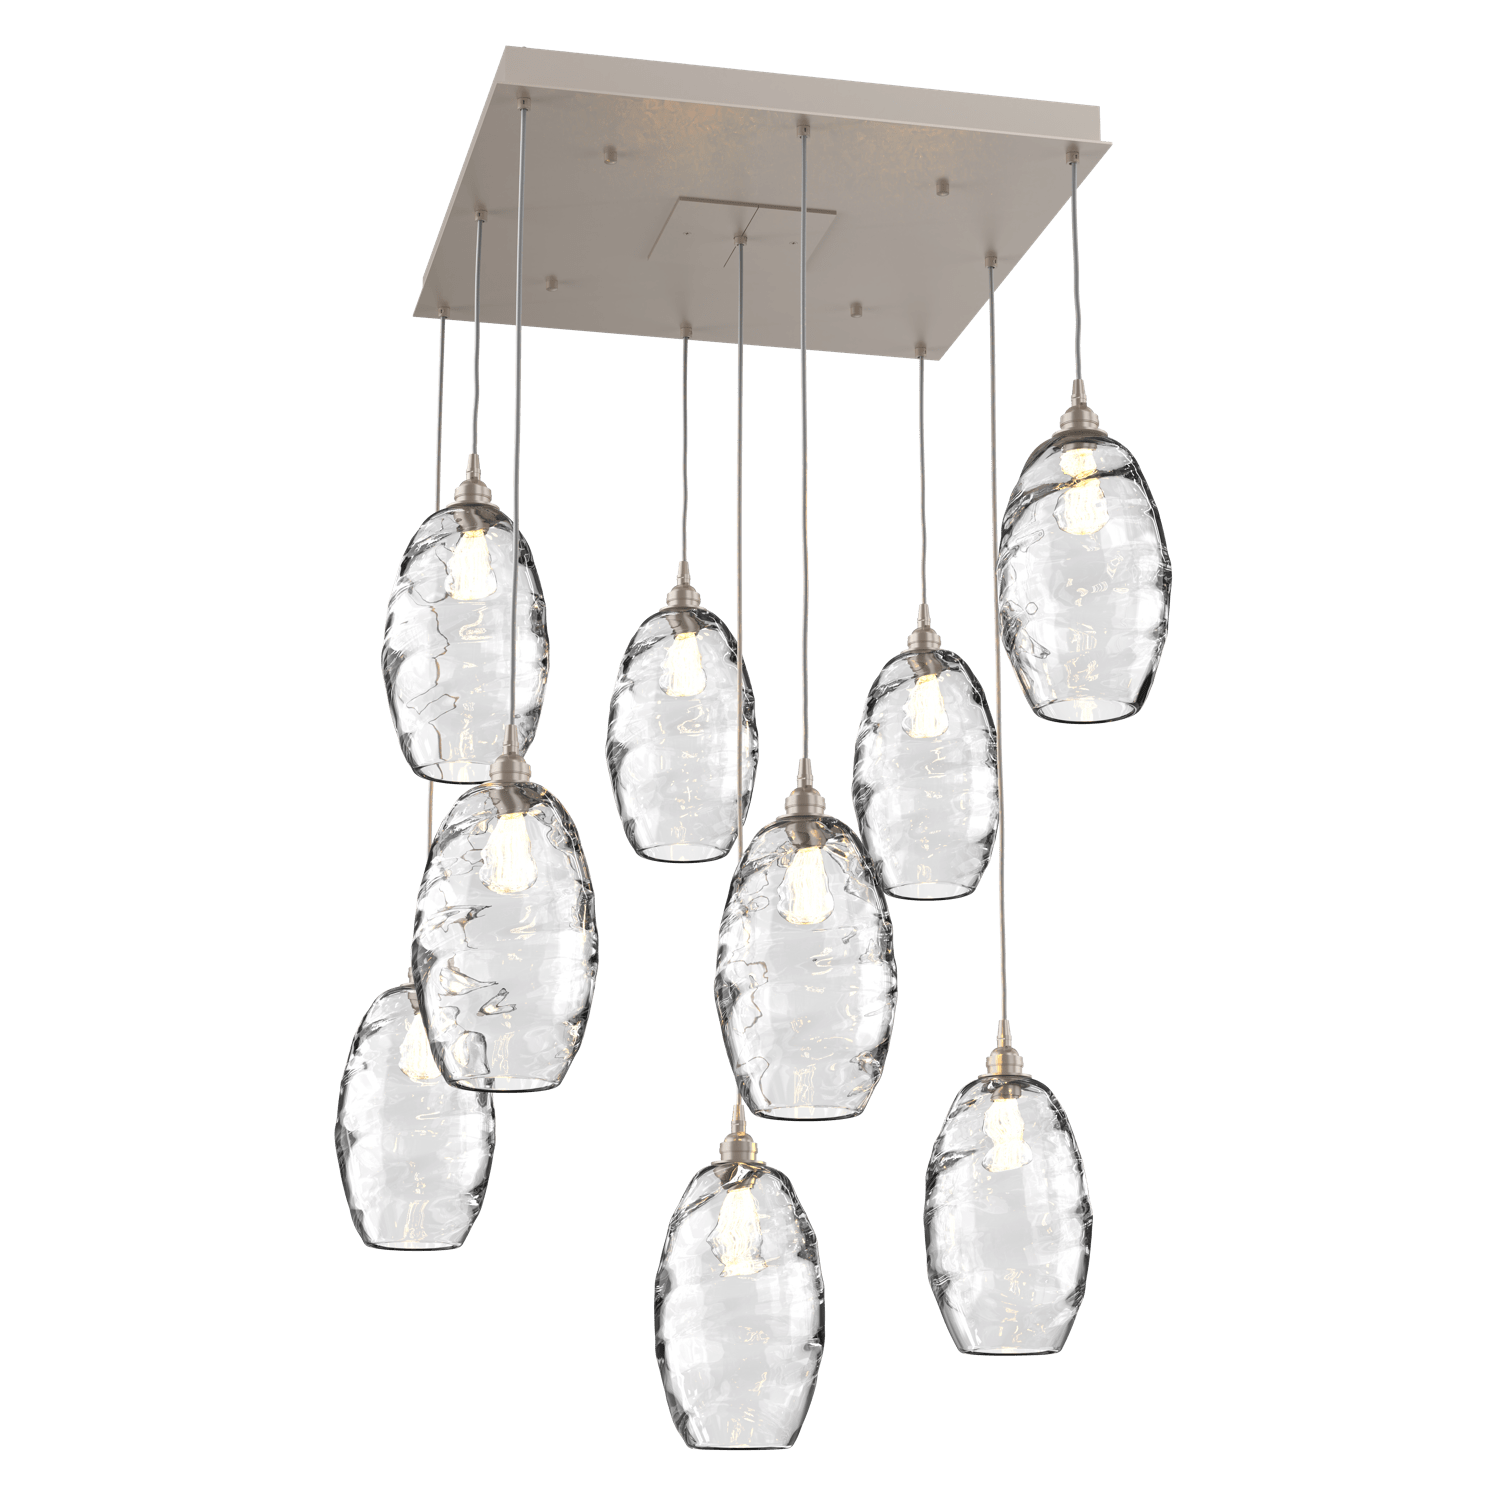 CHB0035-09-BS-OC-Hammerton-Studio-Optic-Blown-Glass-Elisse-9-light-square-pendant-chandelier-with-metallic-beige-silver-finish-and-optic-clear-blown-glass-shades-and-incandescent-lamping